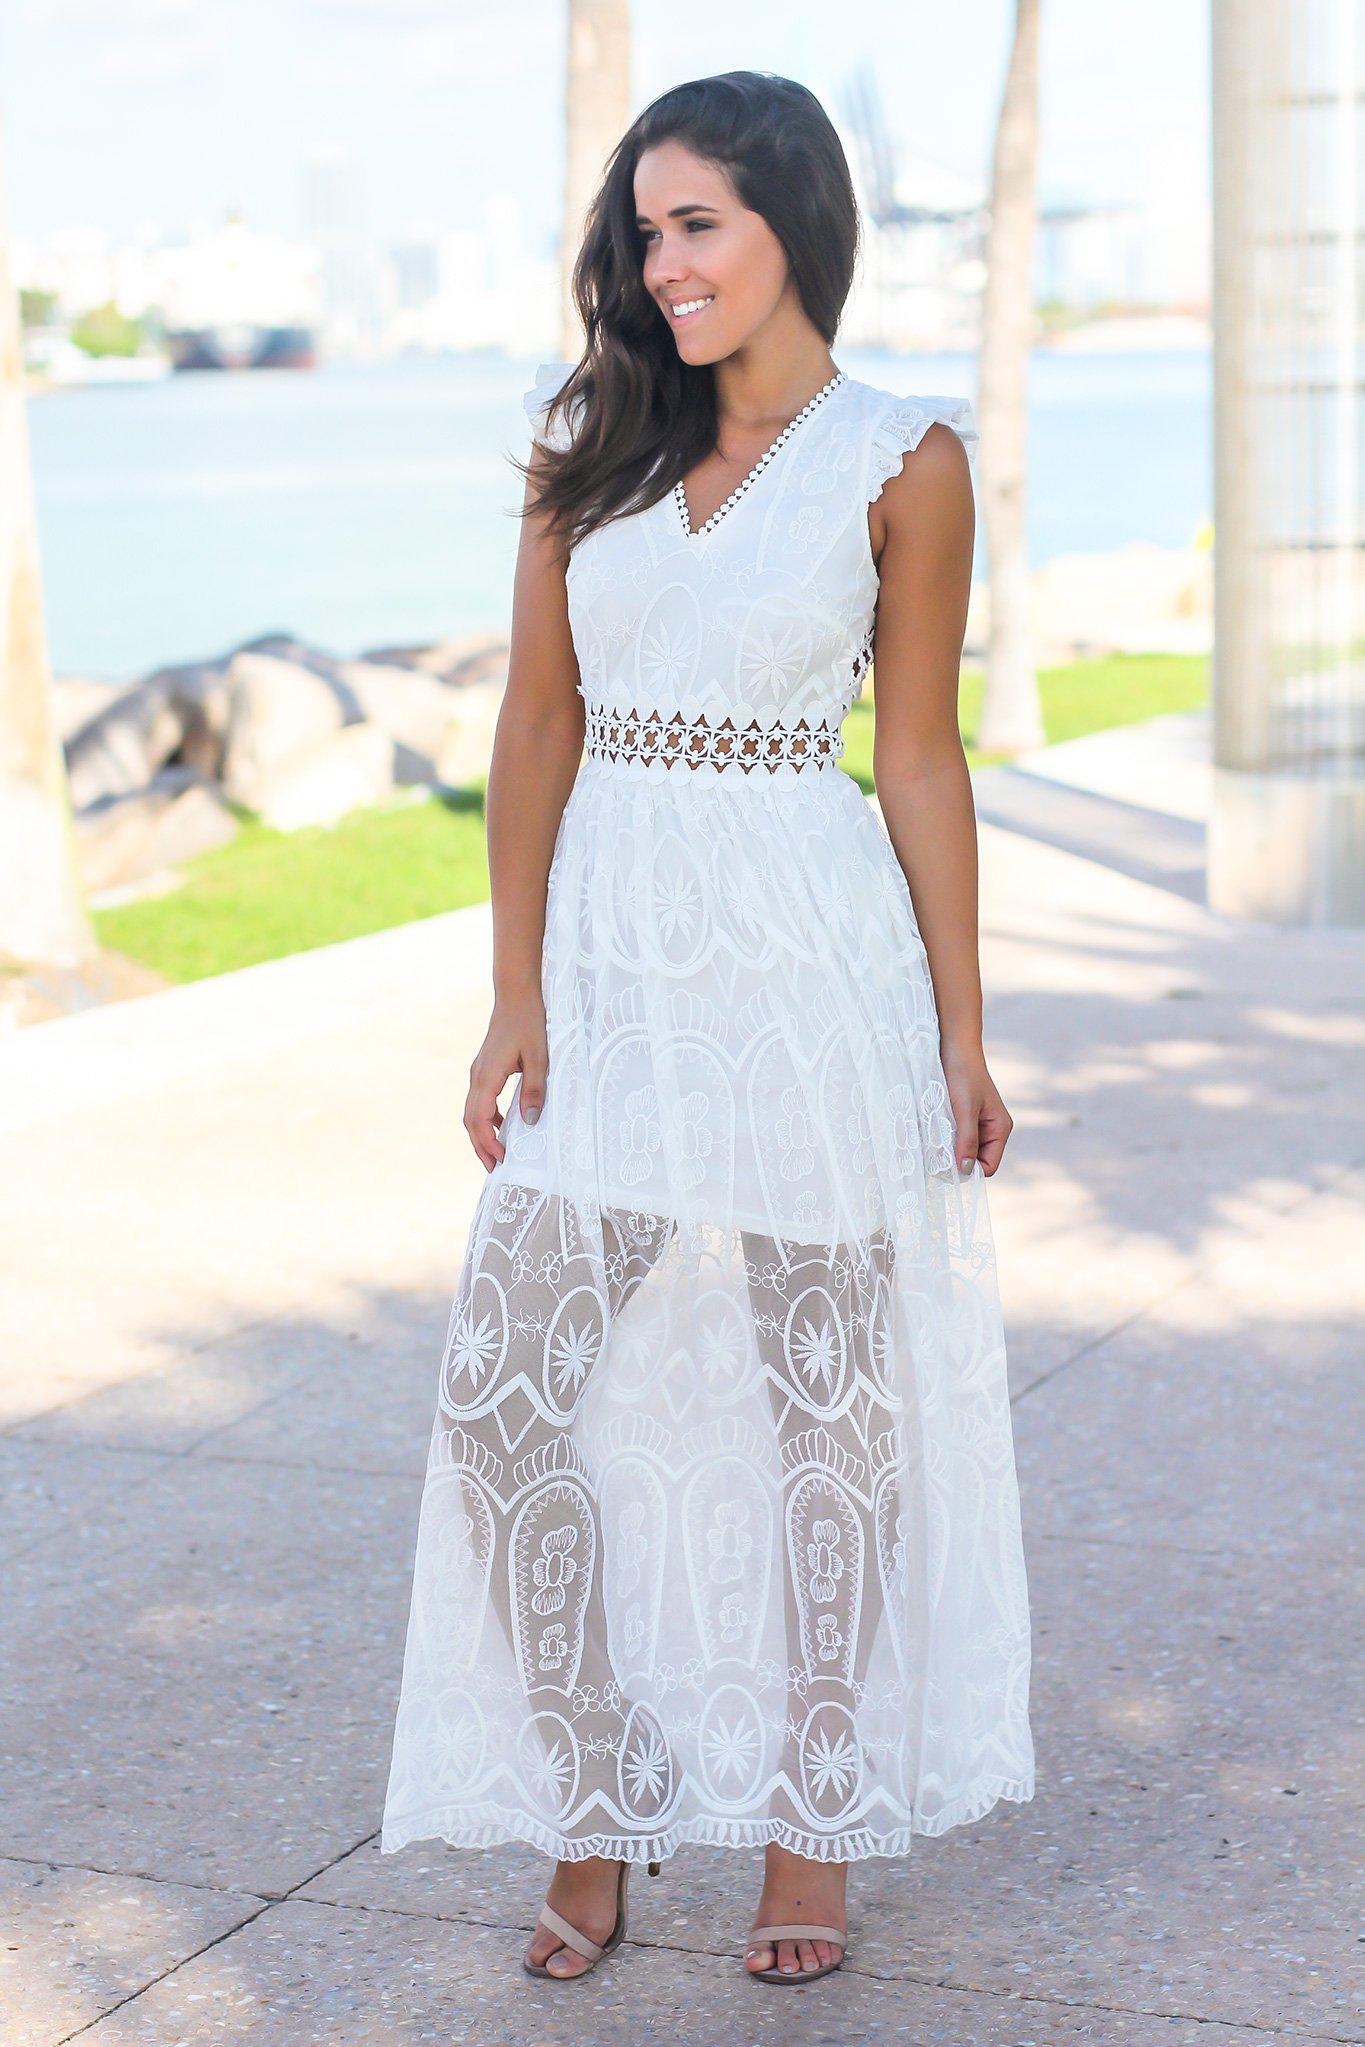 White Lace Maxi Dress with Crochet Back